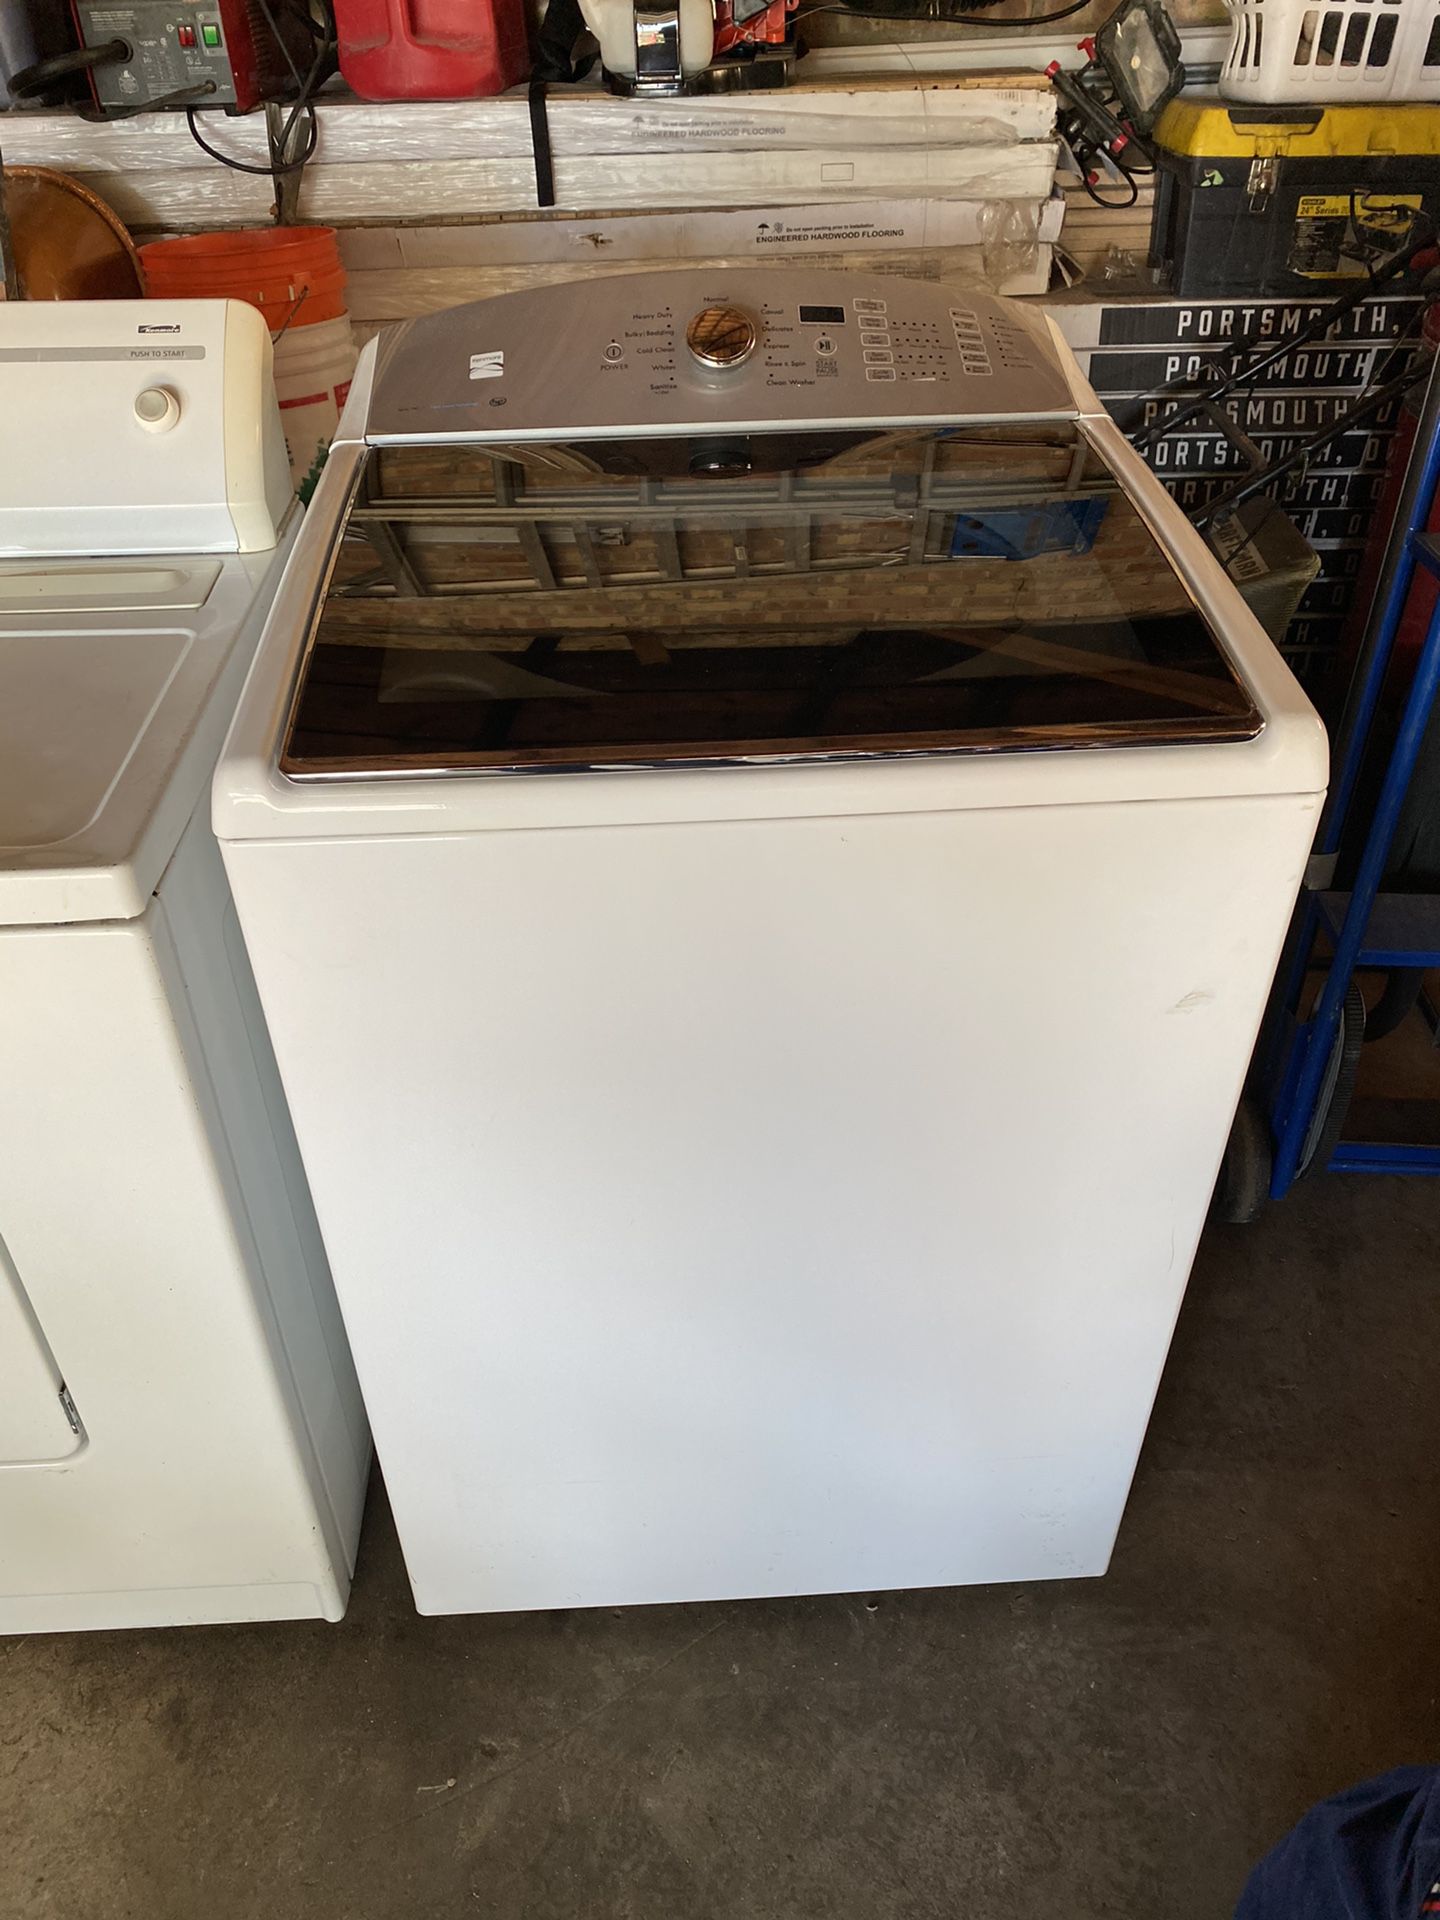 Washer and dryer Kenmore 700 series